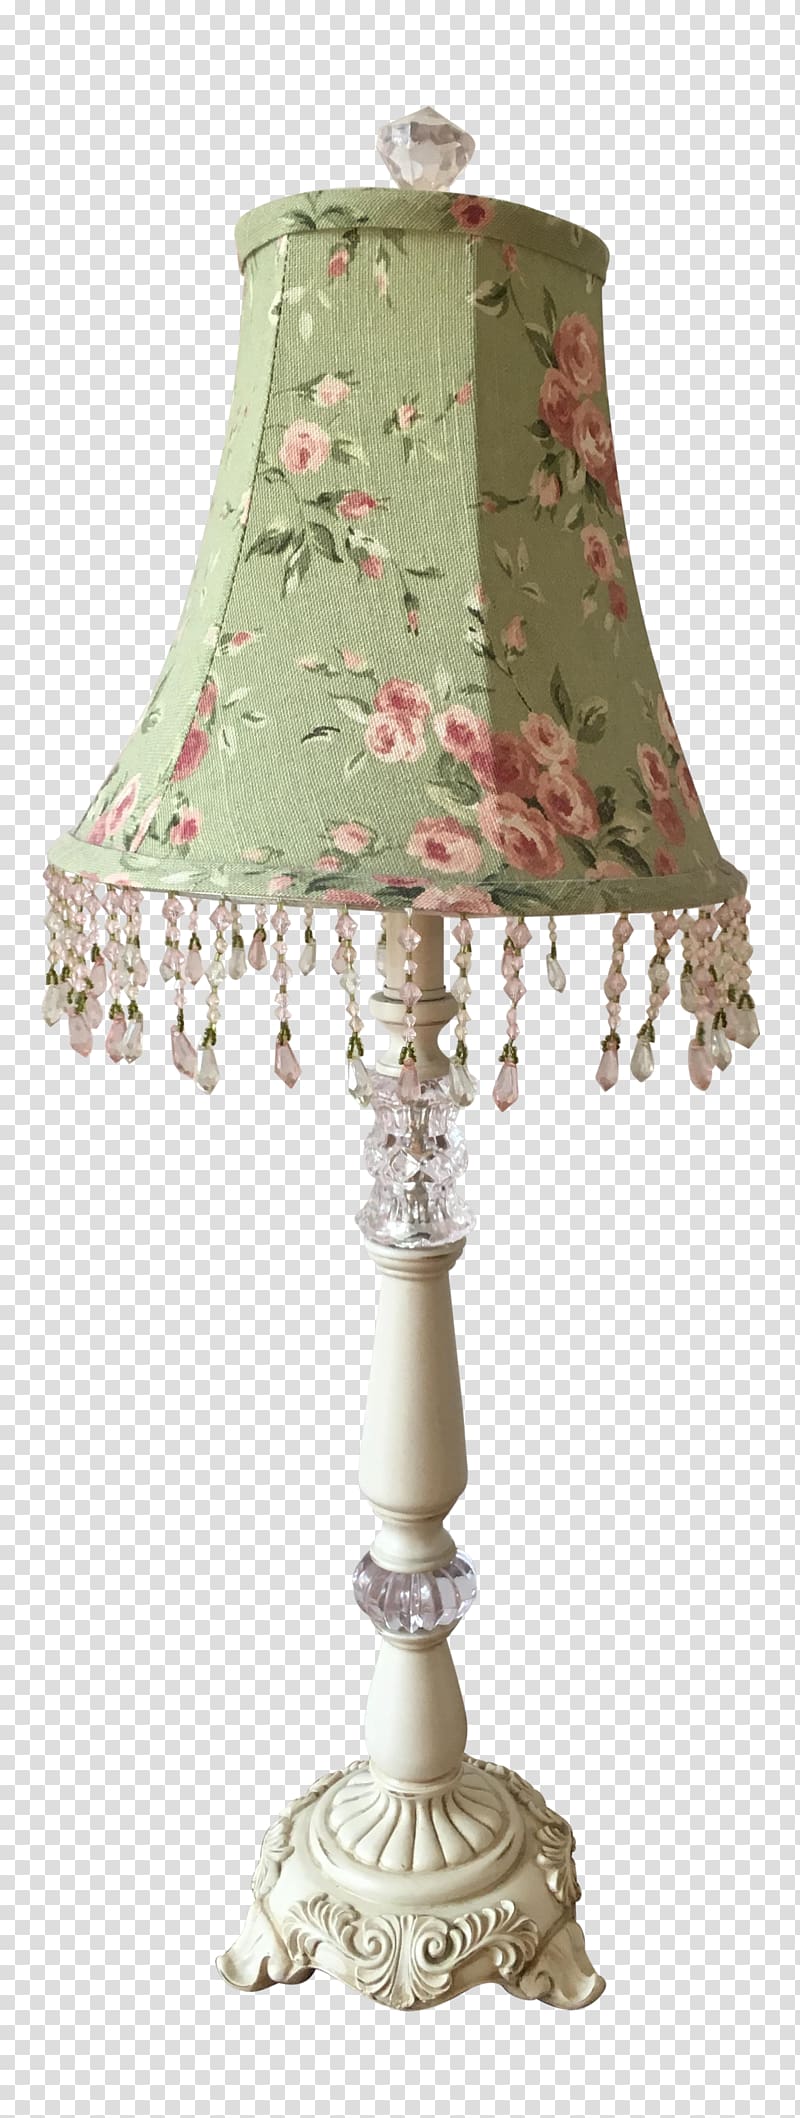 Lamp Shades, Shabby chic Flower transparent background PNG clipart